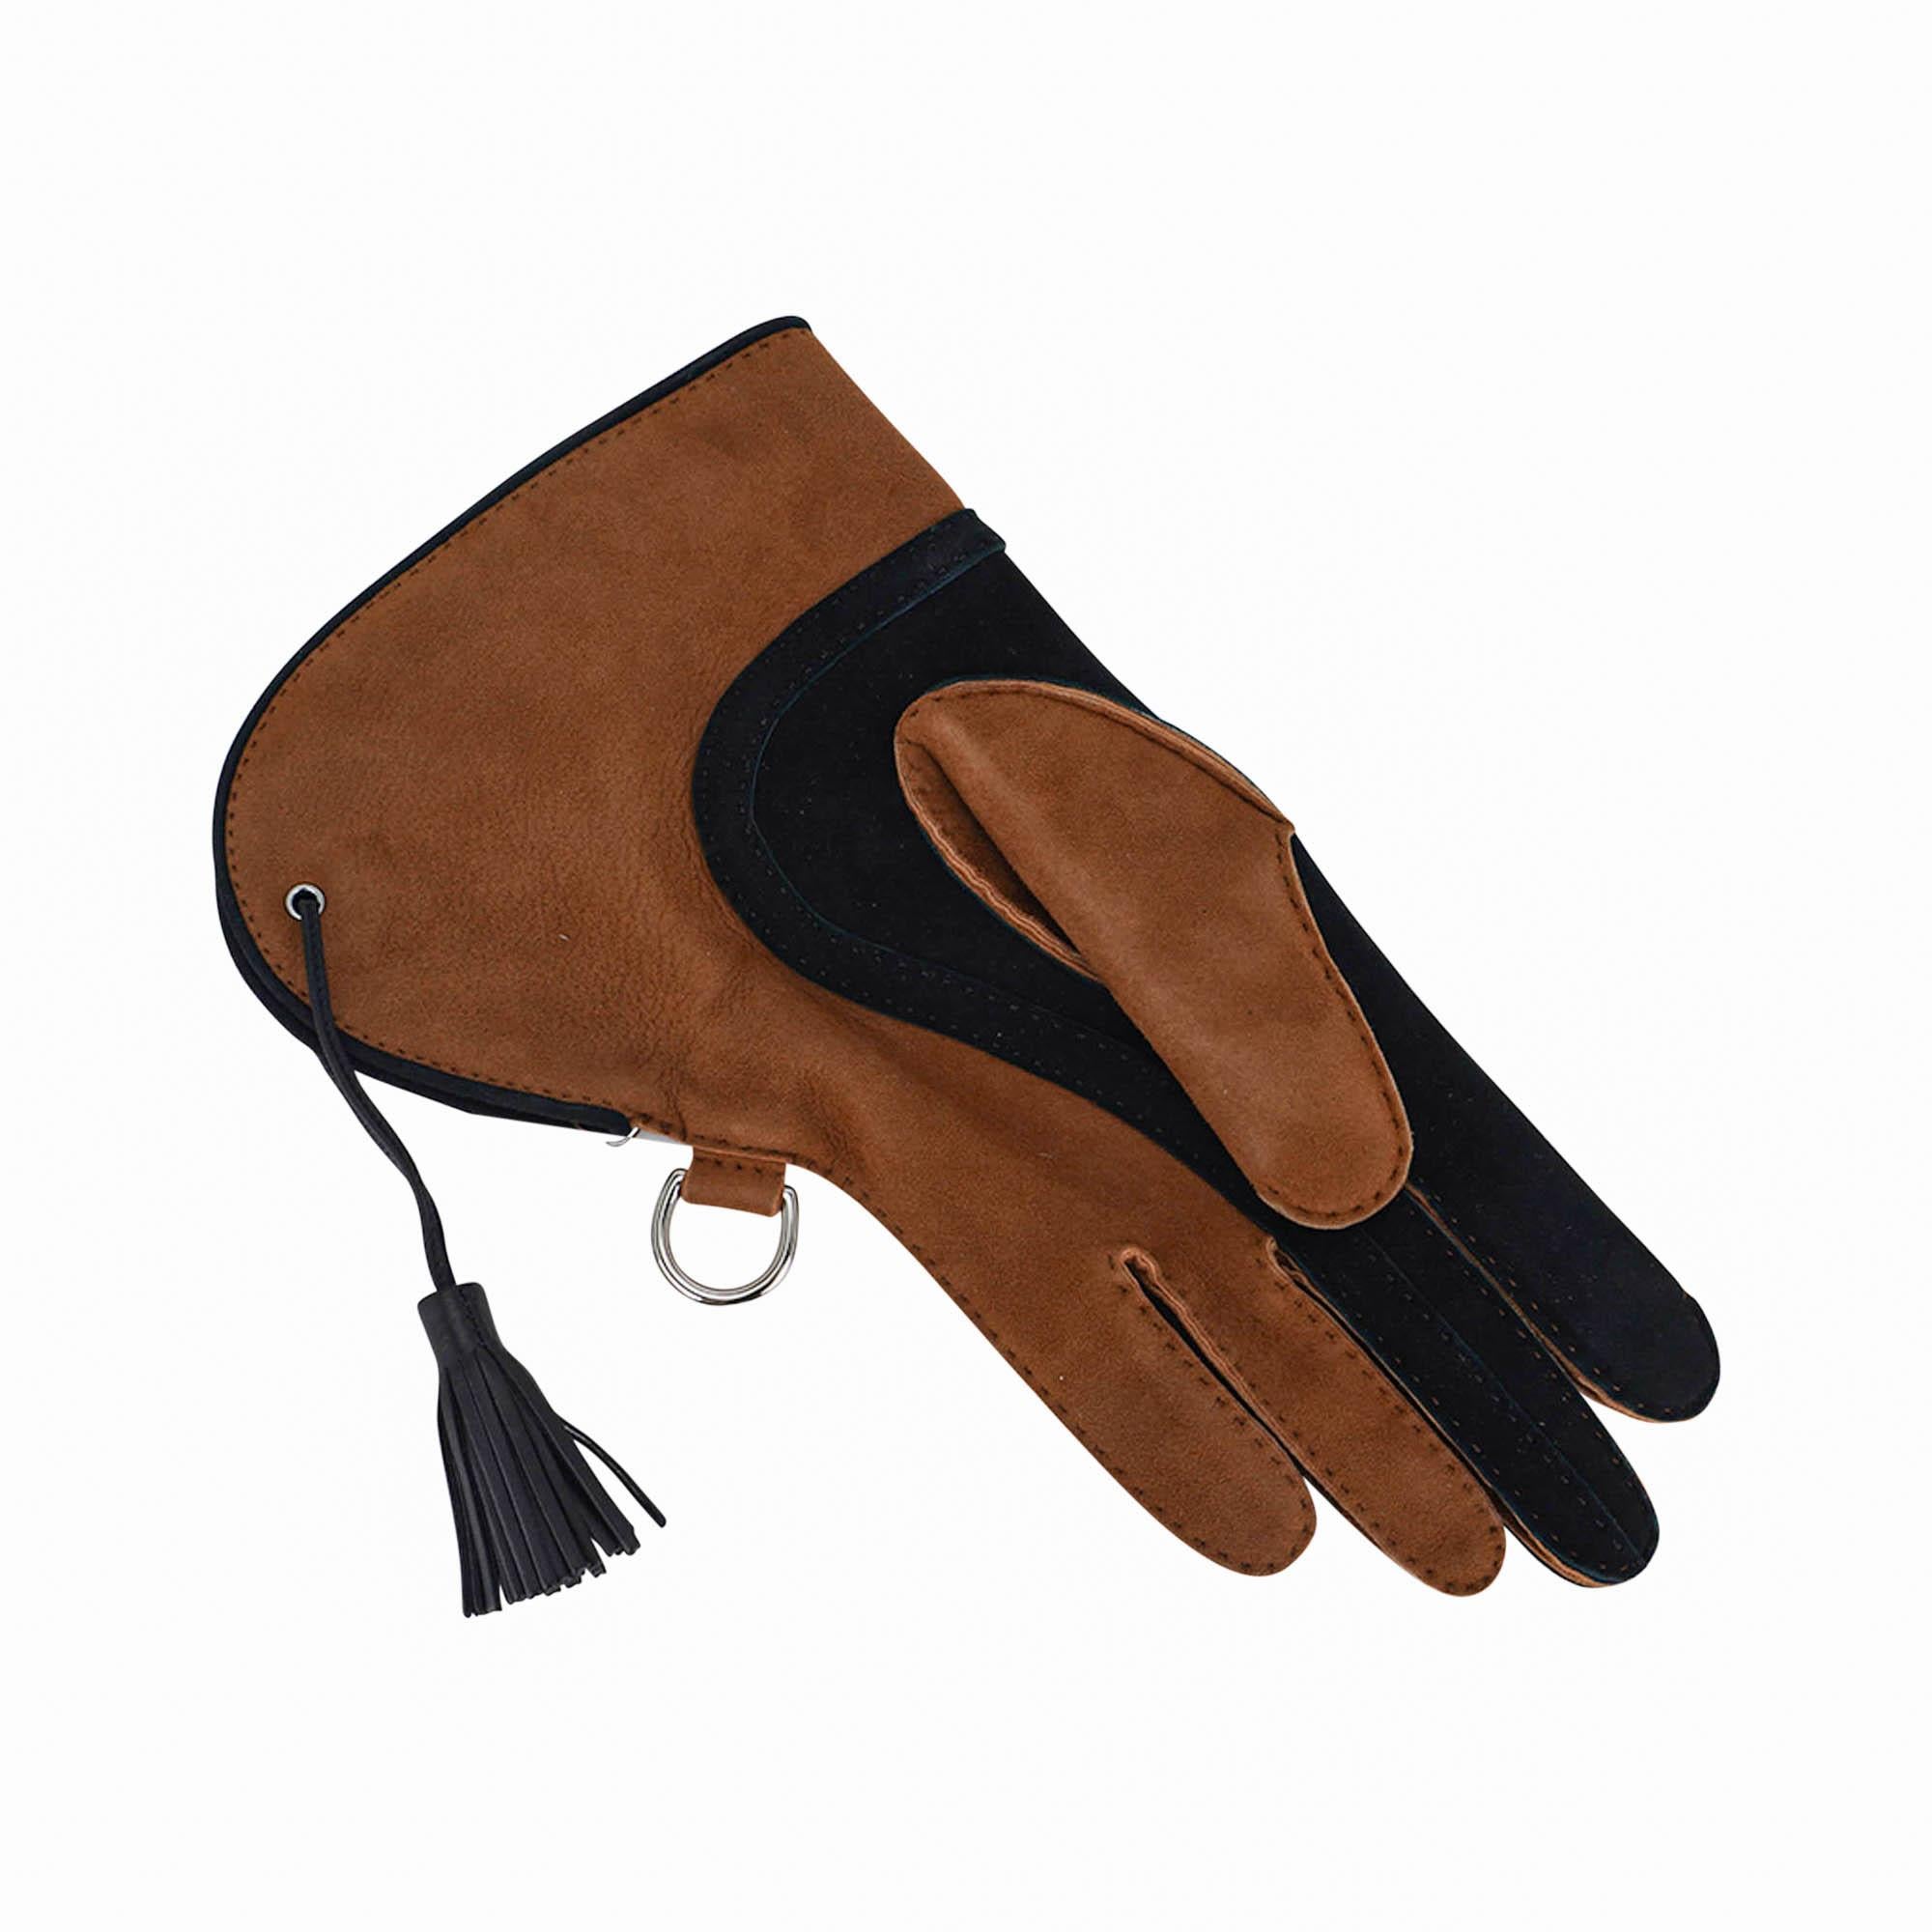 Black Hermes Falconry Glove Lambskin Left Hand Size 9 For Sale